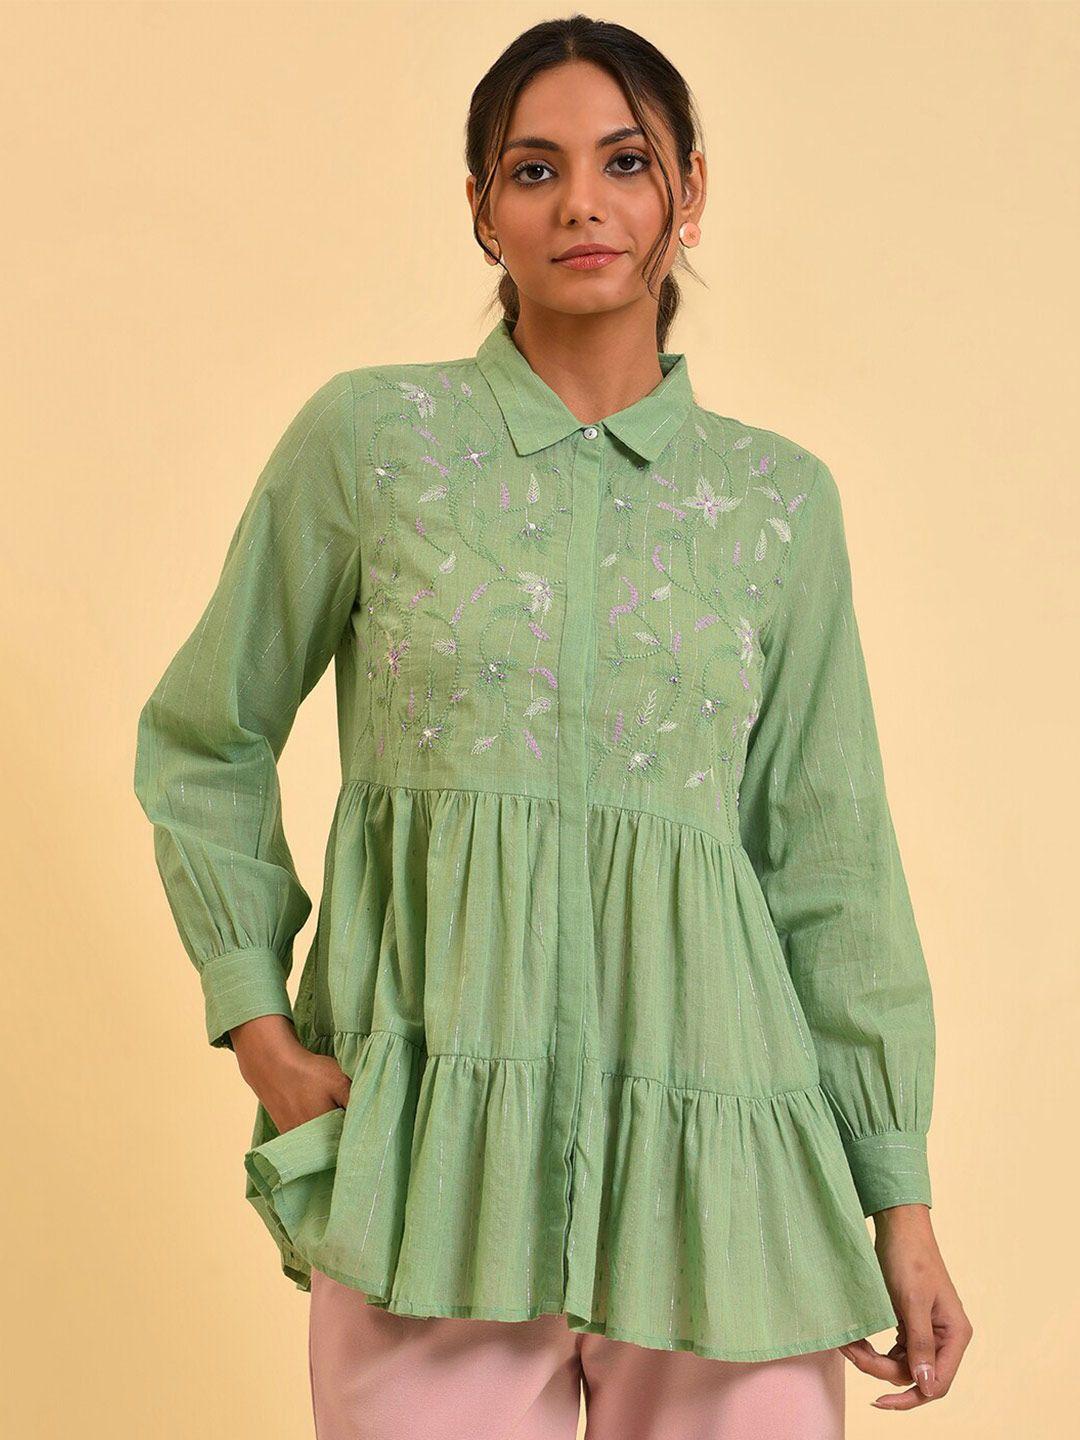 w green floral printed cotton shirt style top